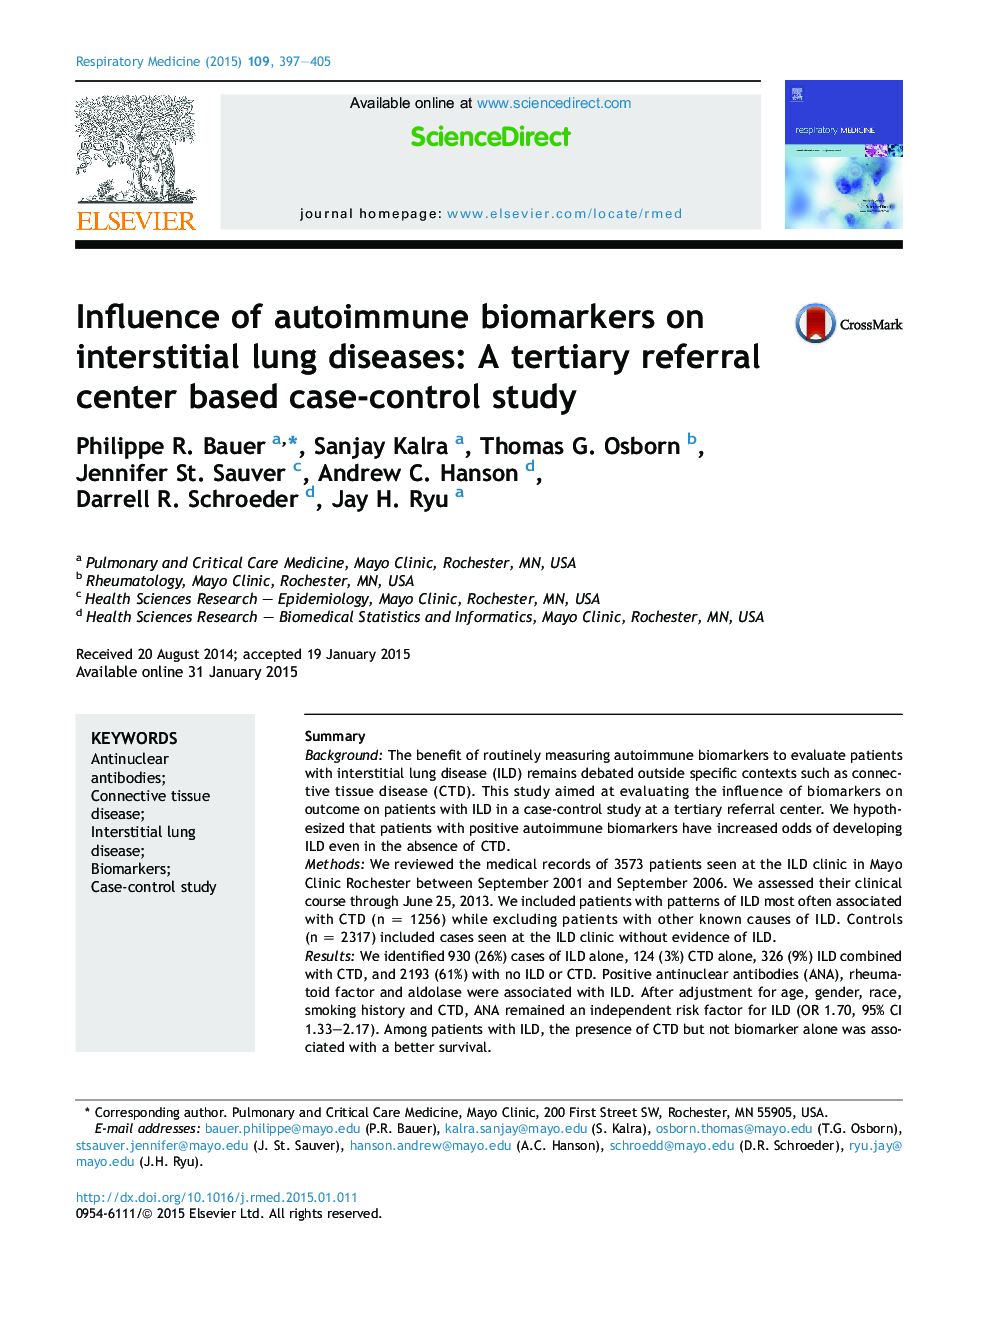 Influence of autoimmune biomarkers on interstitial lung diseases: A tertiary referral center based case-control study